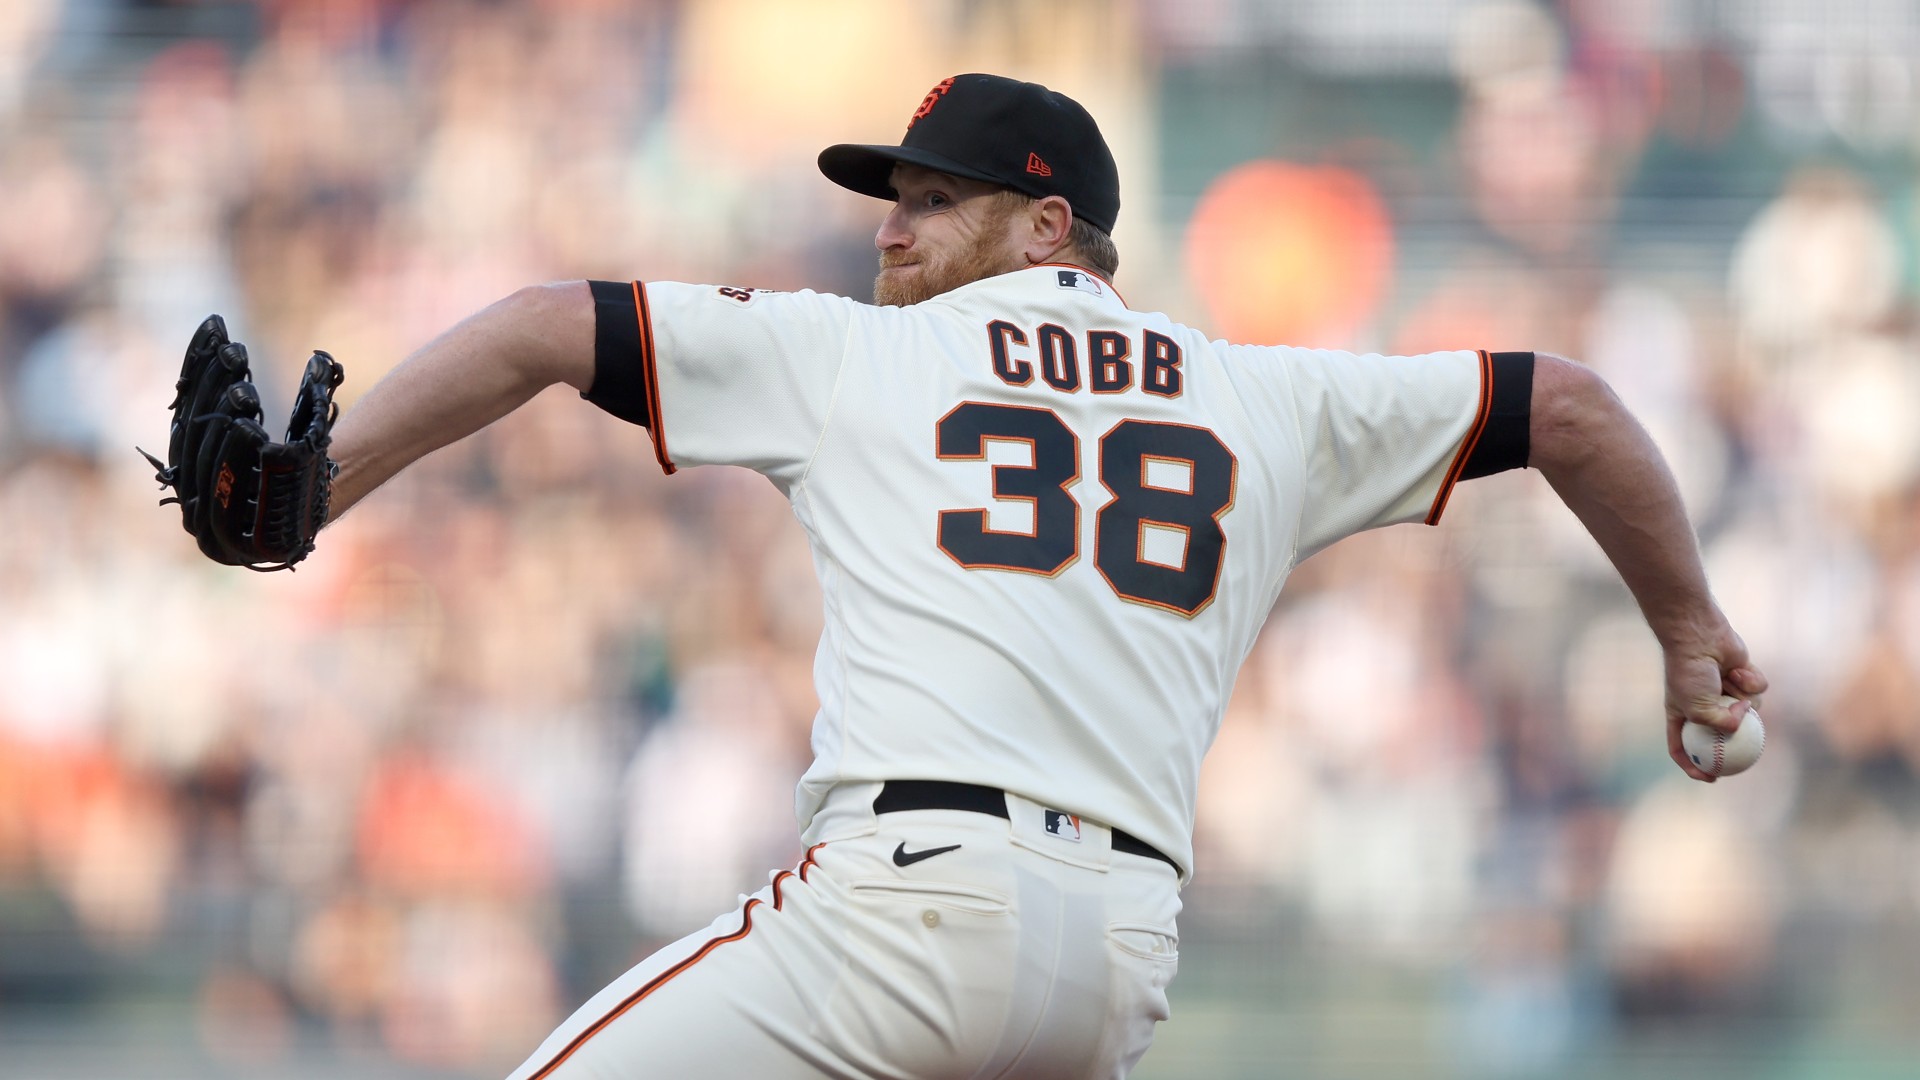 Dodgers vs. Giants Odds, Picks & Predictions: A Contrarian MLB Betting System for Wednesday Night (August 3) article feature image